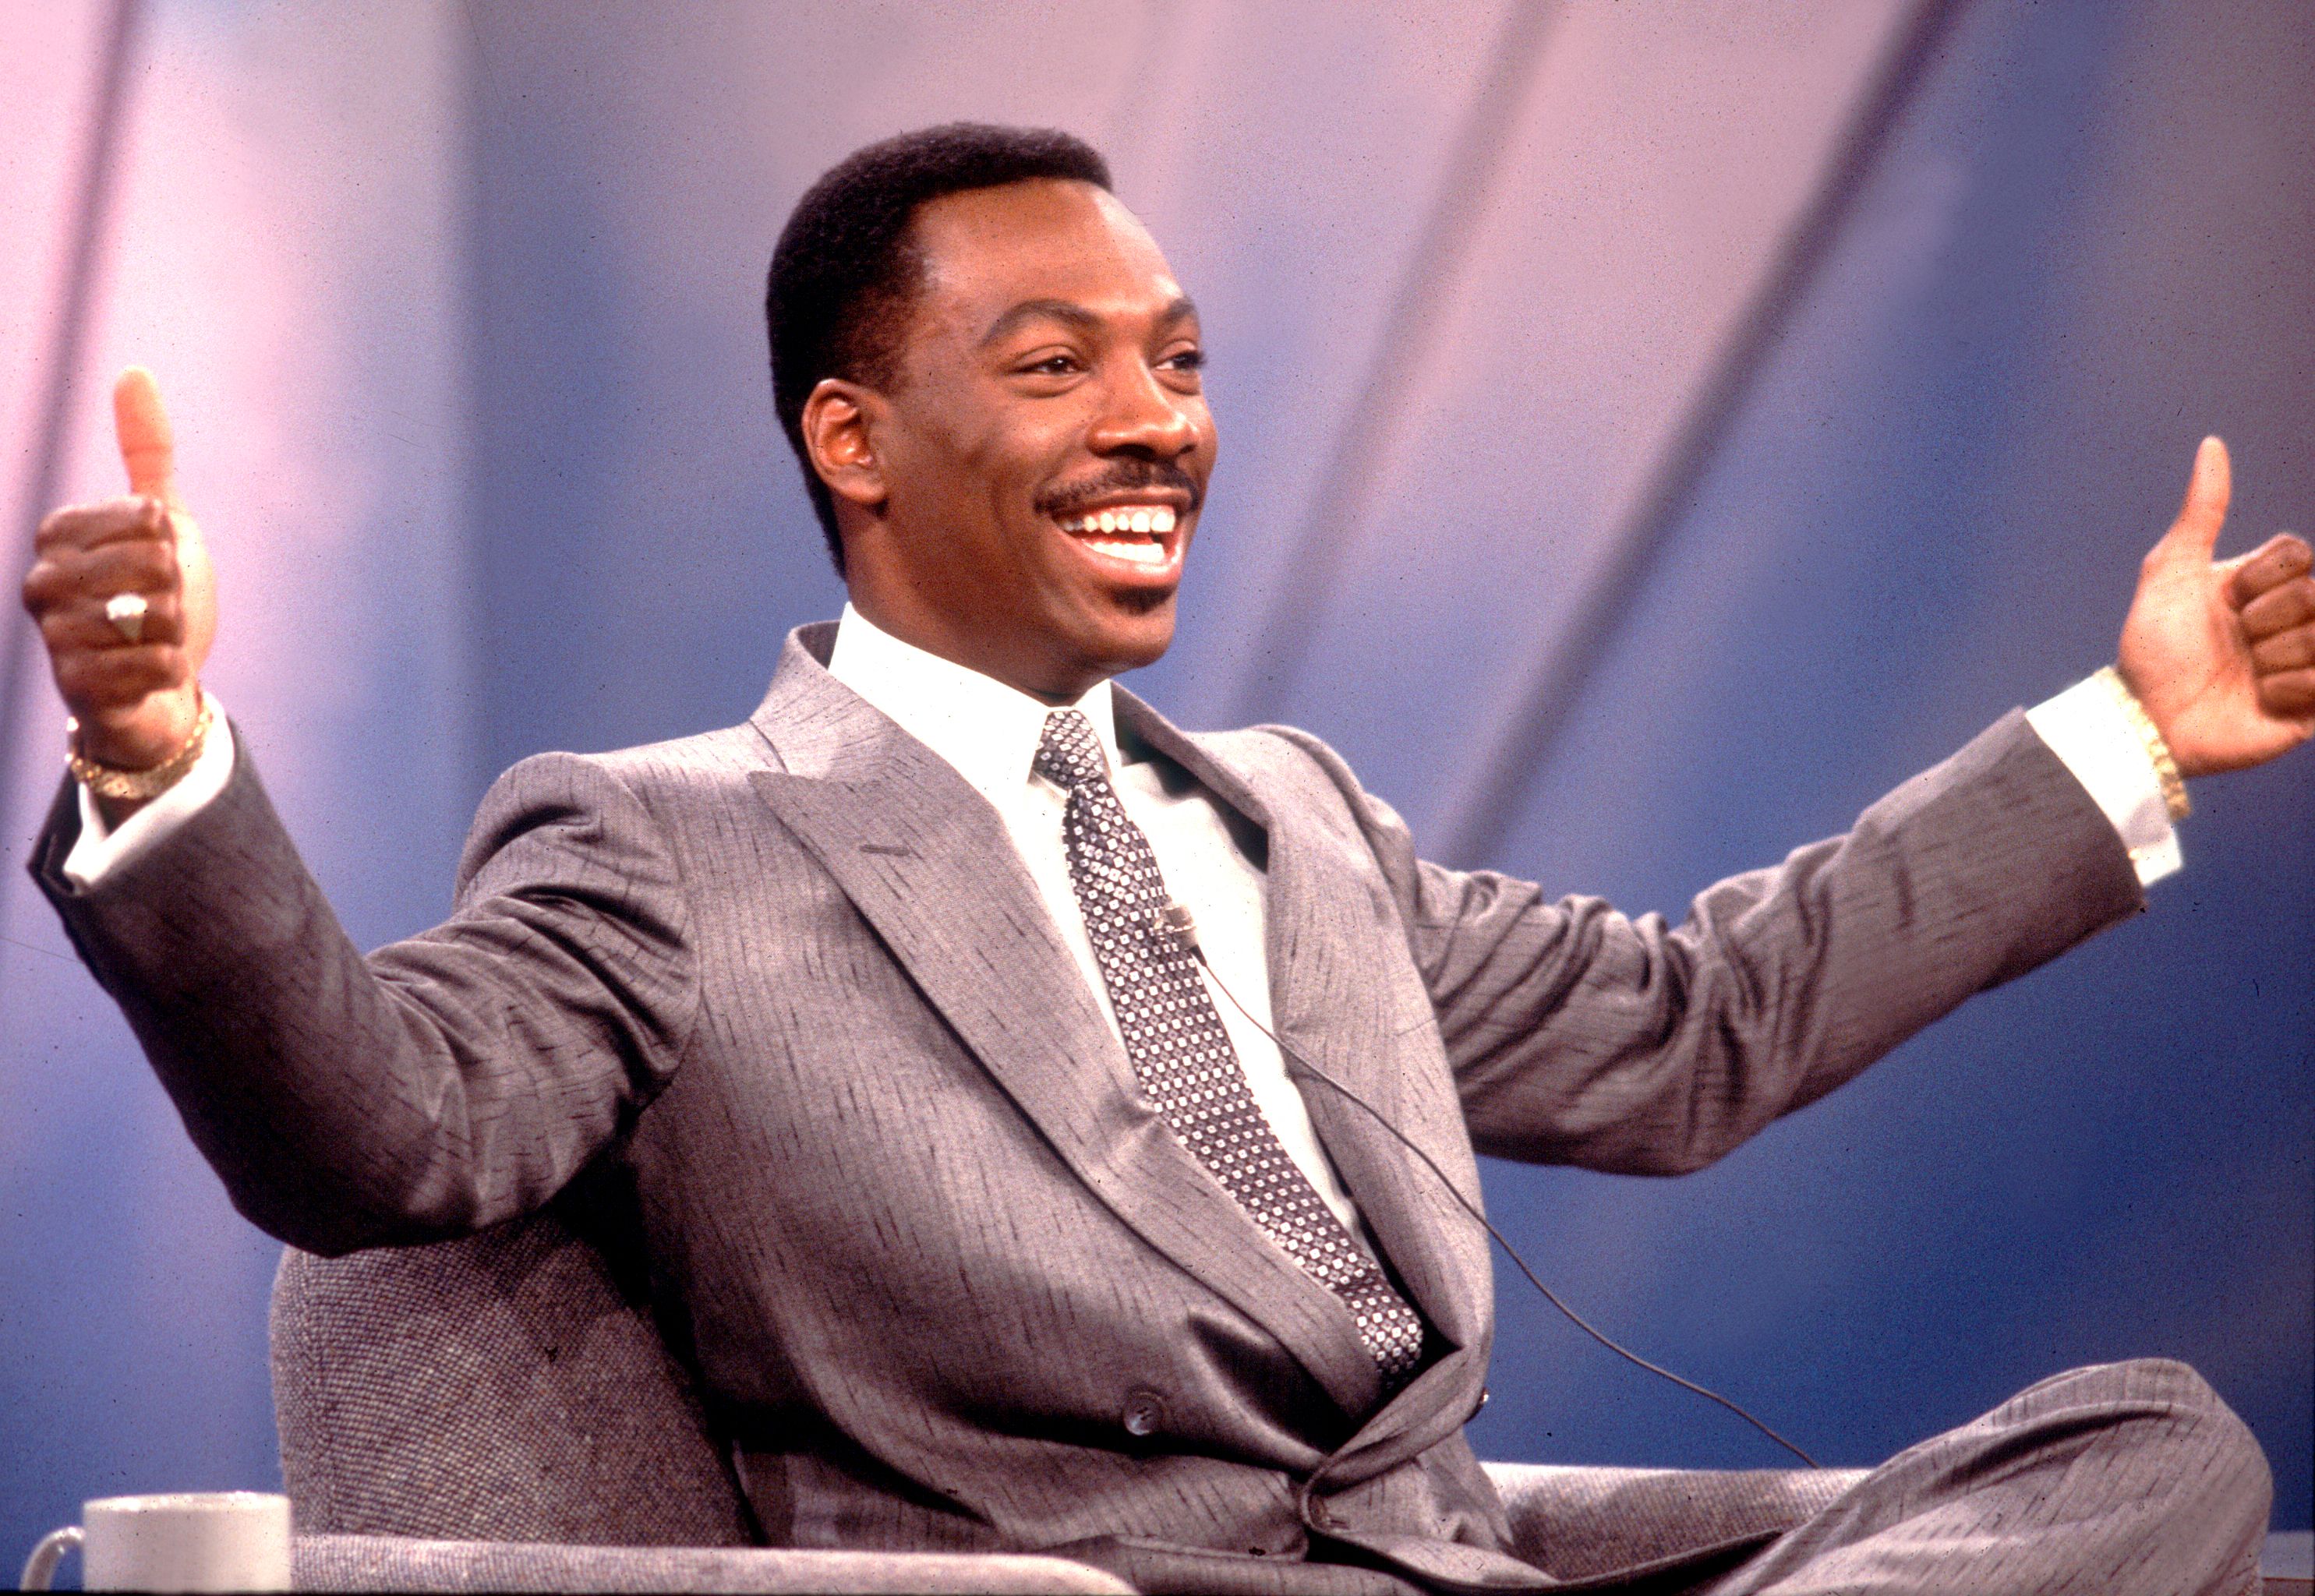 Actor and comedian Eddie Murphy during his TV guesting at the "Oprah Winfrey Show" in Chicago in 1987. | Photo: Getty Images